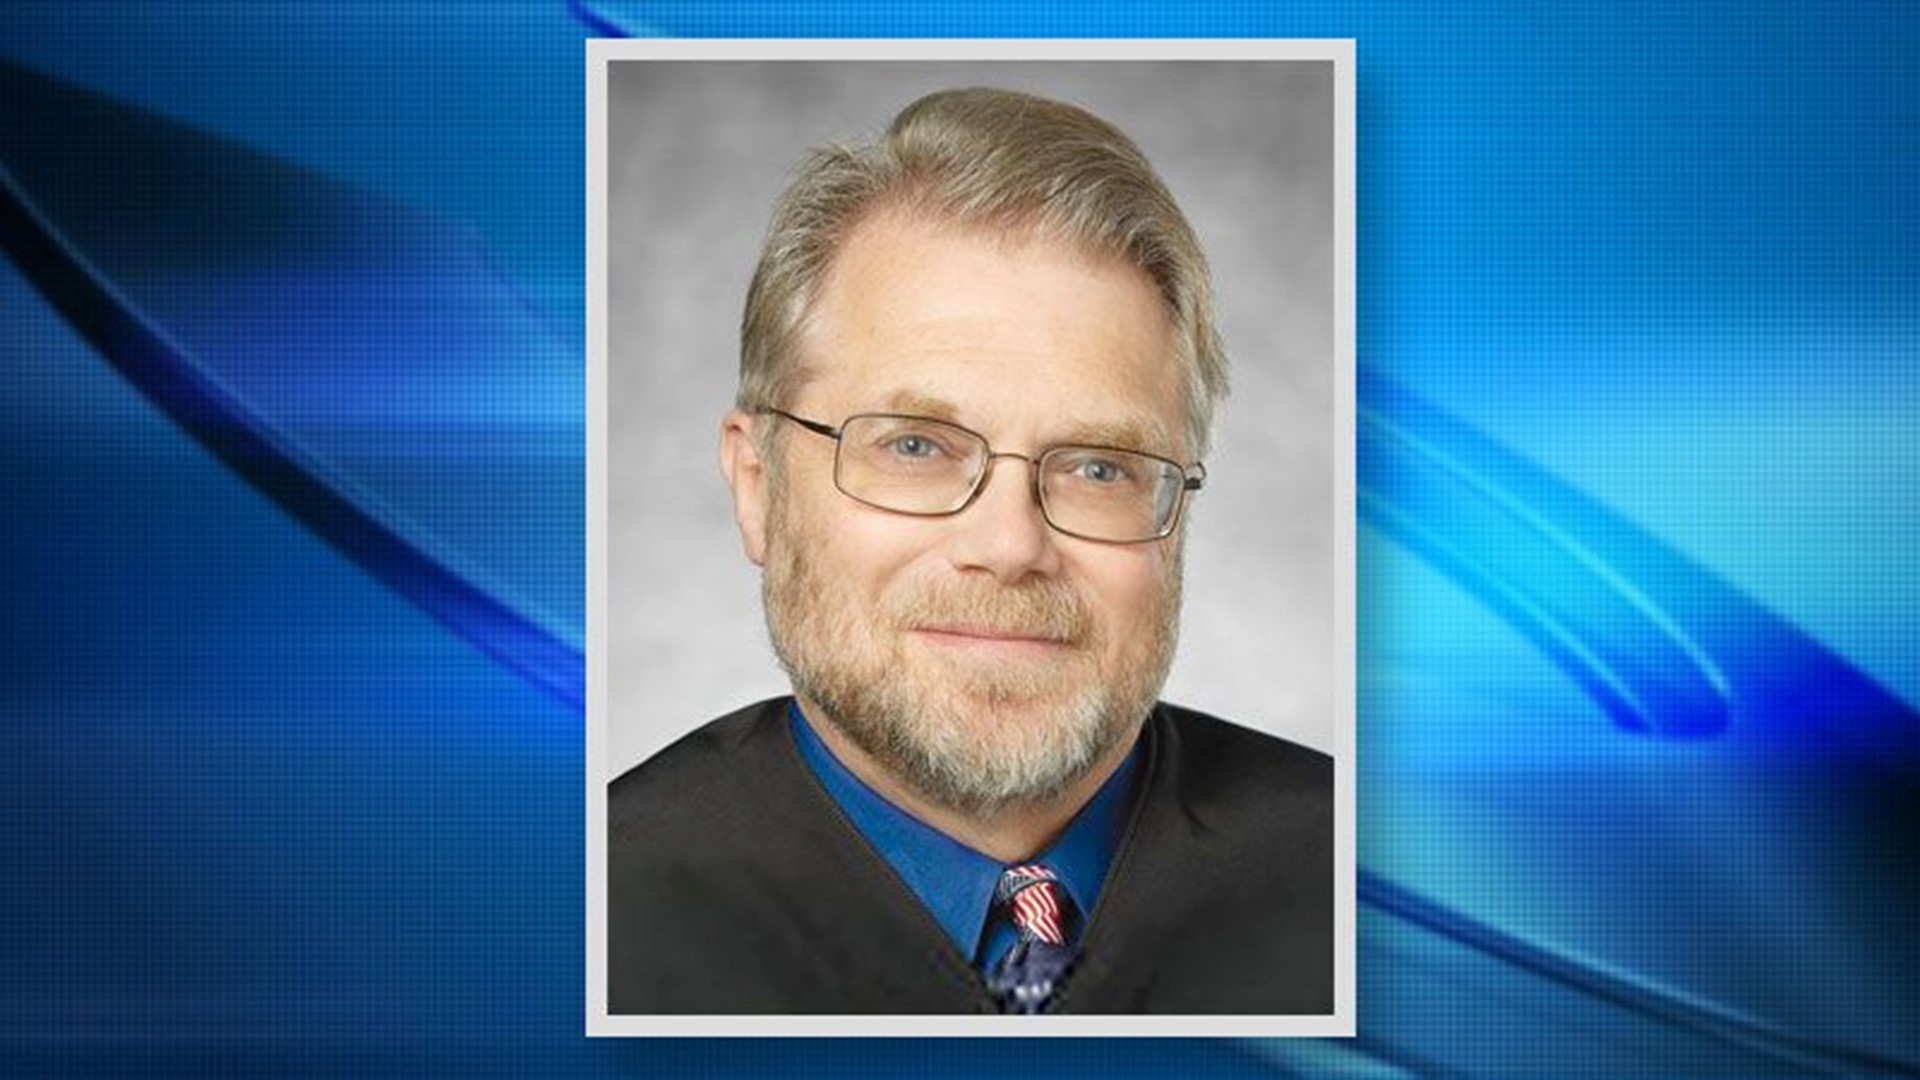 San Diego judge charged with 29 acts of judicial misconduct cbs8 com